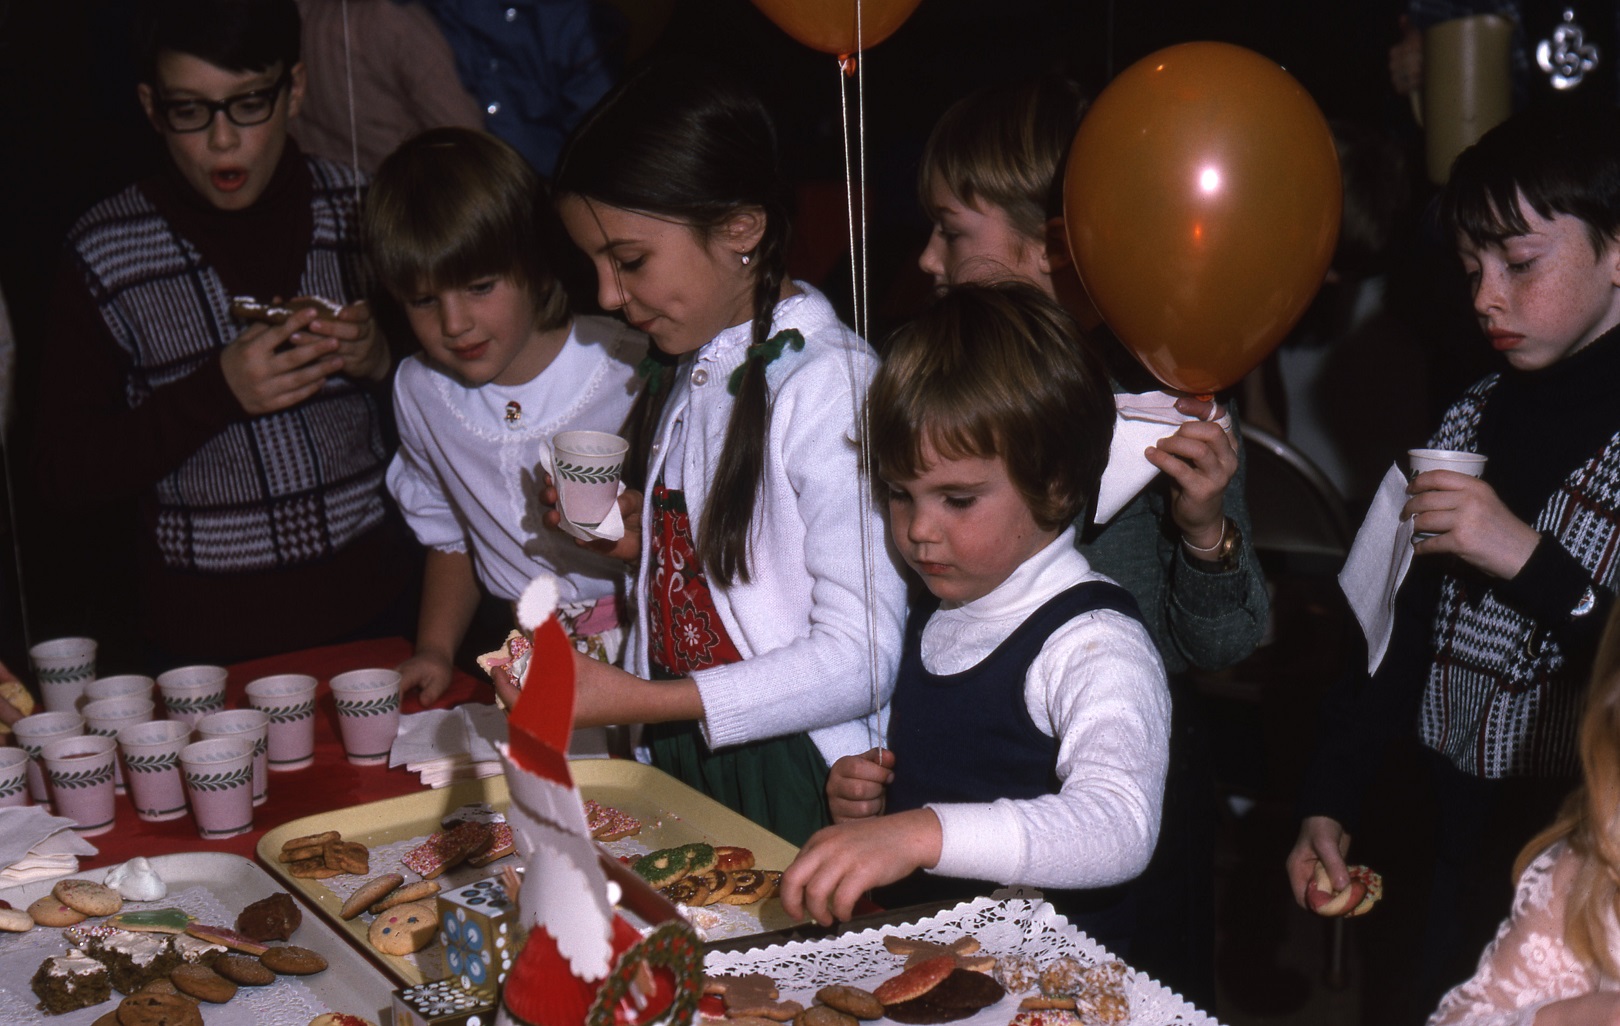 Children at cookie table in 1975.